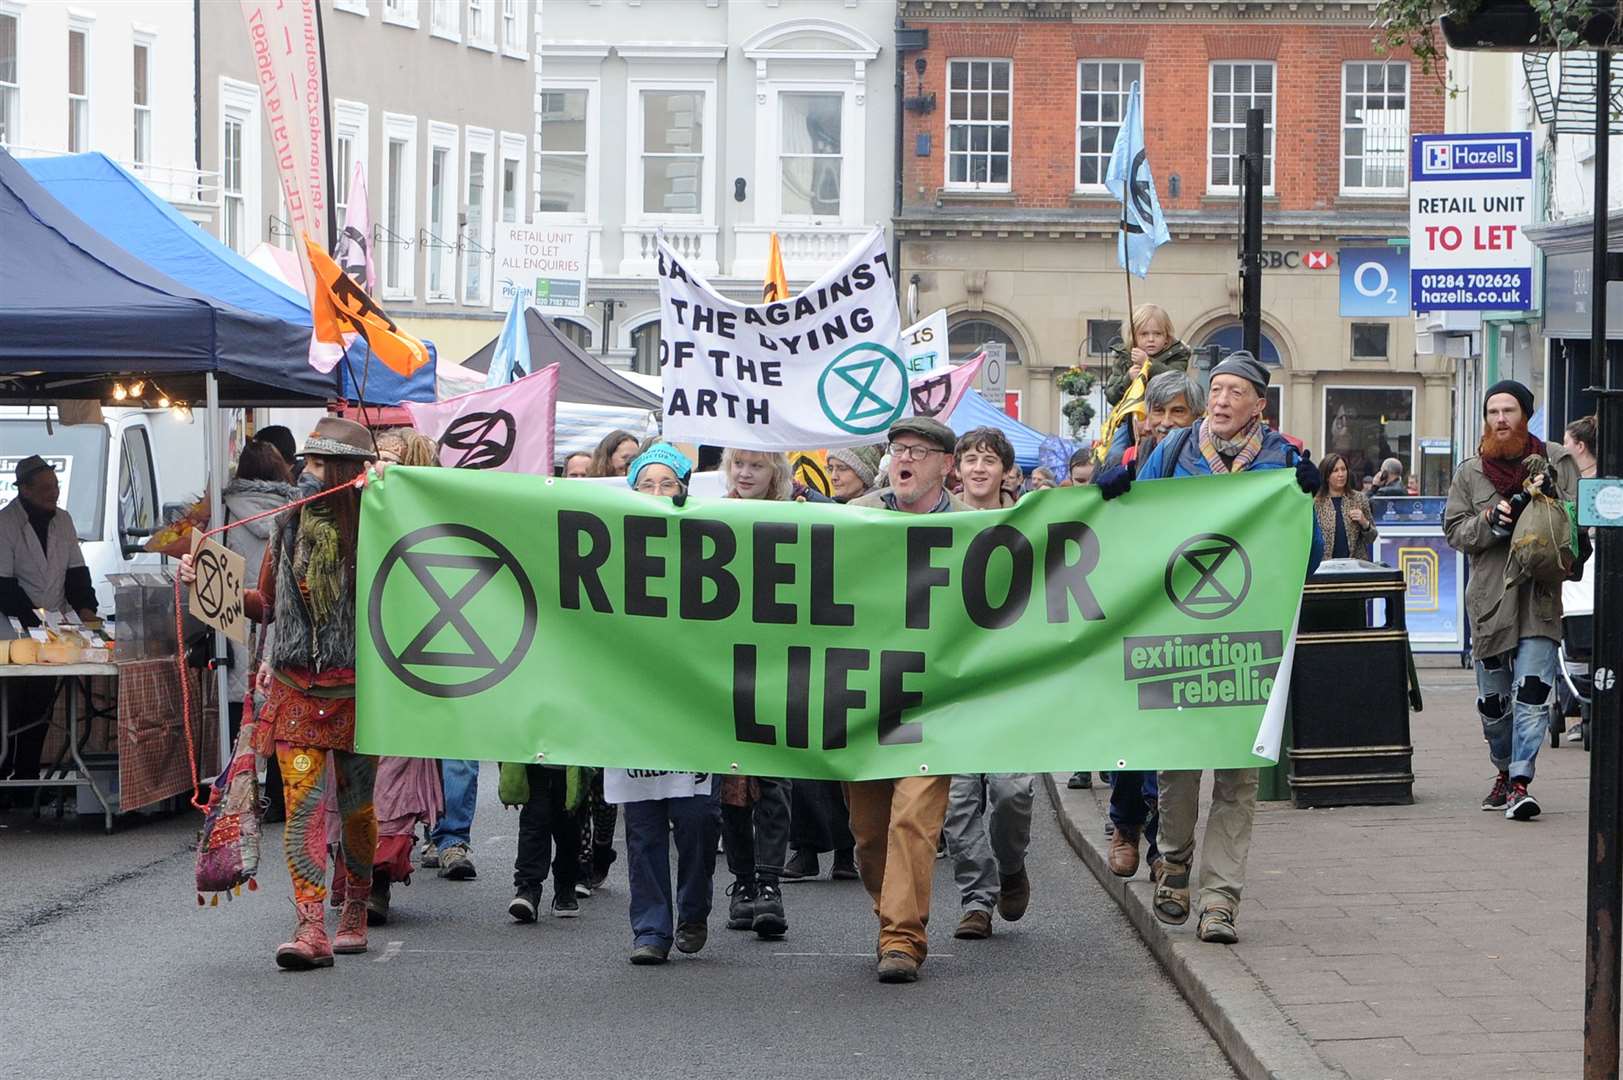 Extinction Rebellion is a non-violent protest organisation which is trying to get the government to do something about climate change.